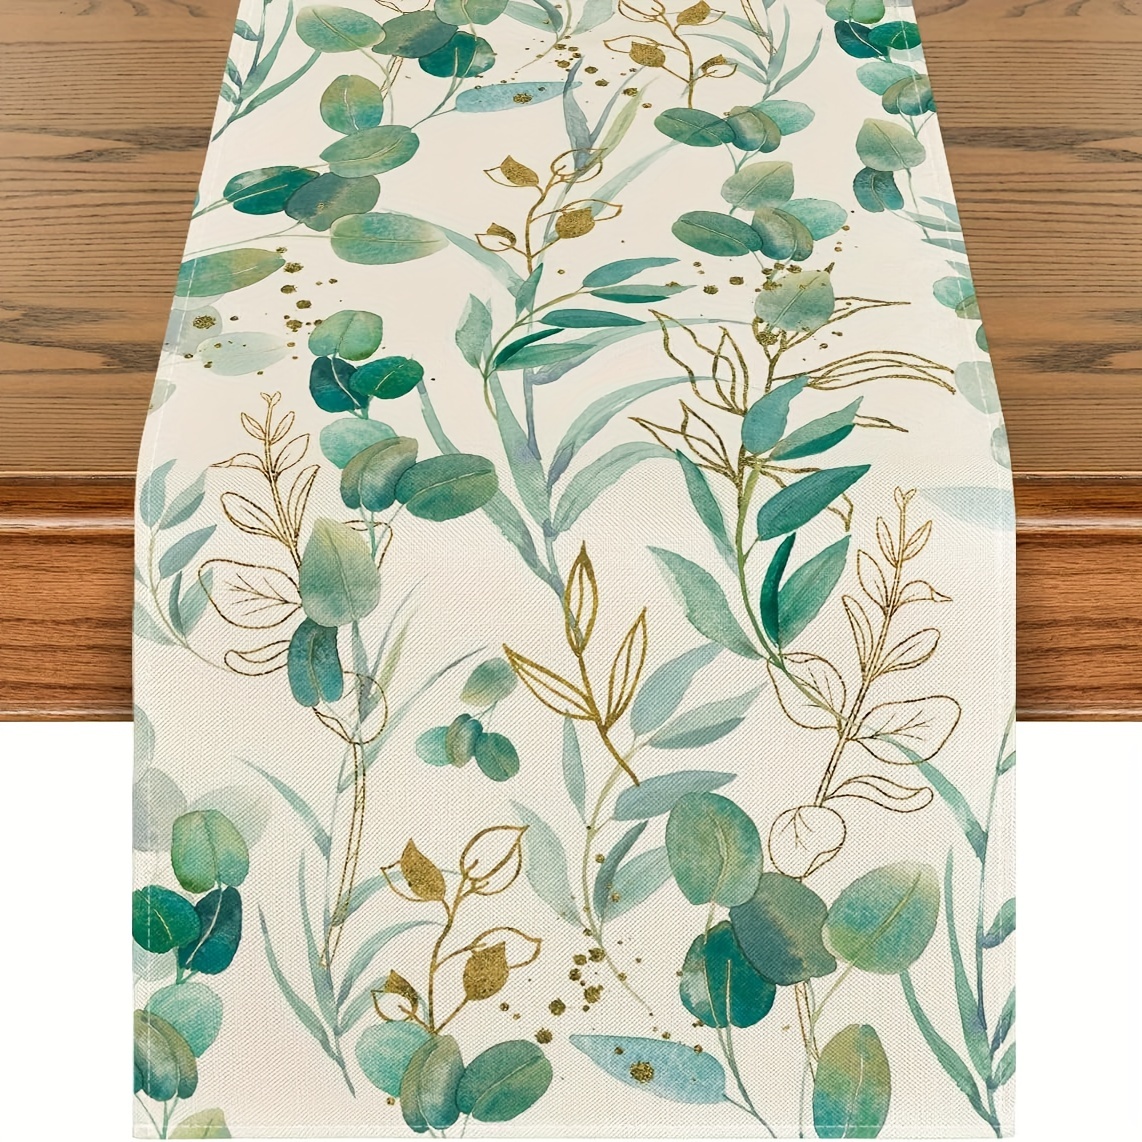 

1pc, Table Runner, Green Leaves Printed Table Runner, Spring Theme Floral Design, Dustproof & Wipe Clean Table Runner, Perfect For Home Party Decor, Dining Table Decoration, Aesthetic Room Decor